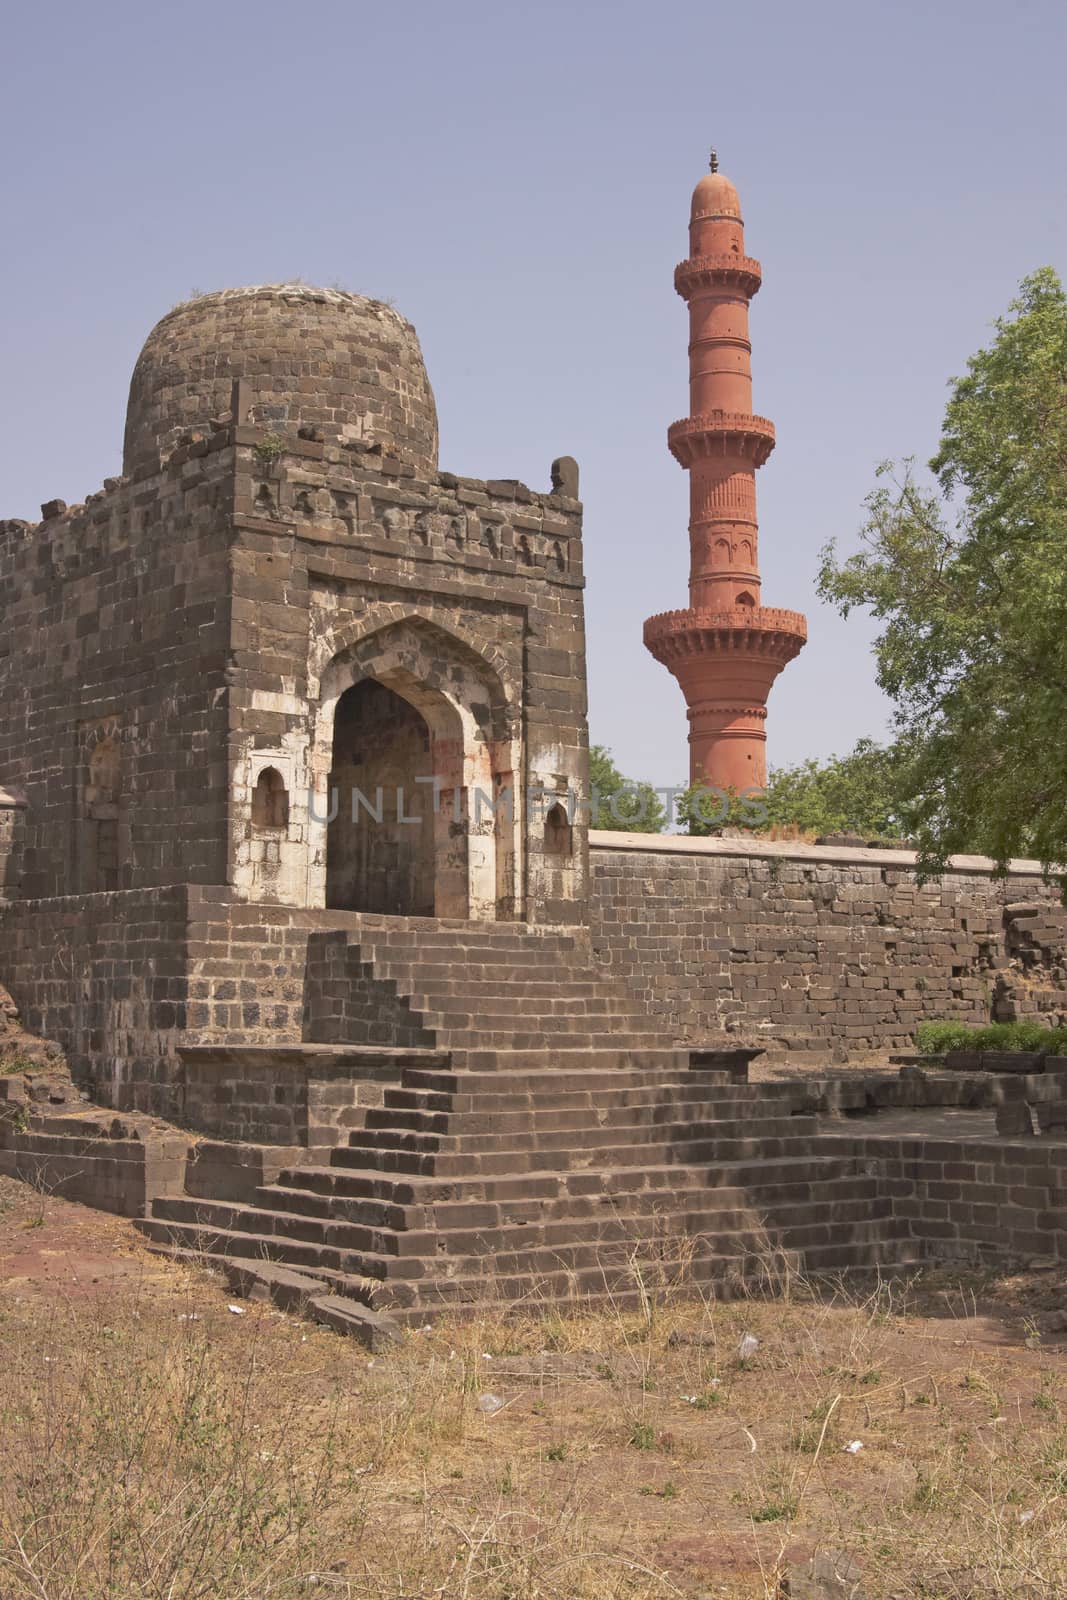 Entrance to the Mosque inside Daulatabad Fortress, India. Islamic victory tower (Chand Minar) in the background. 14th Century AD